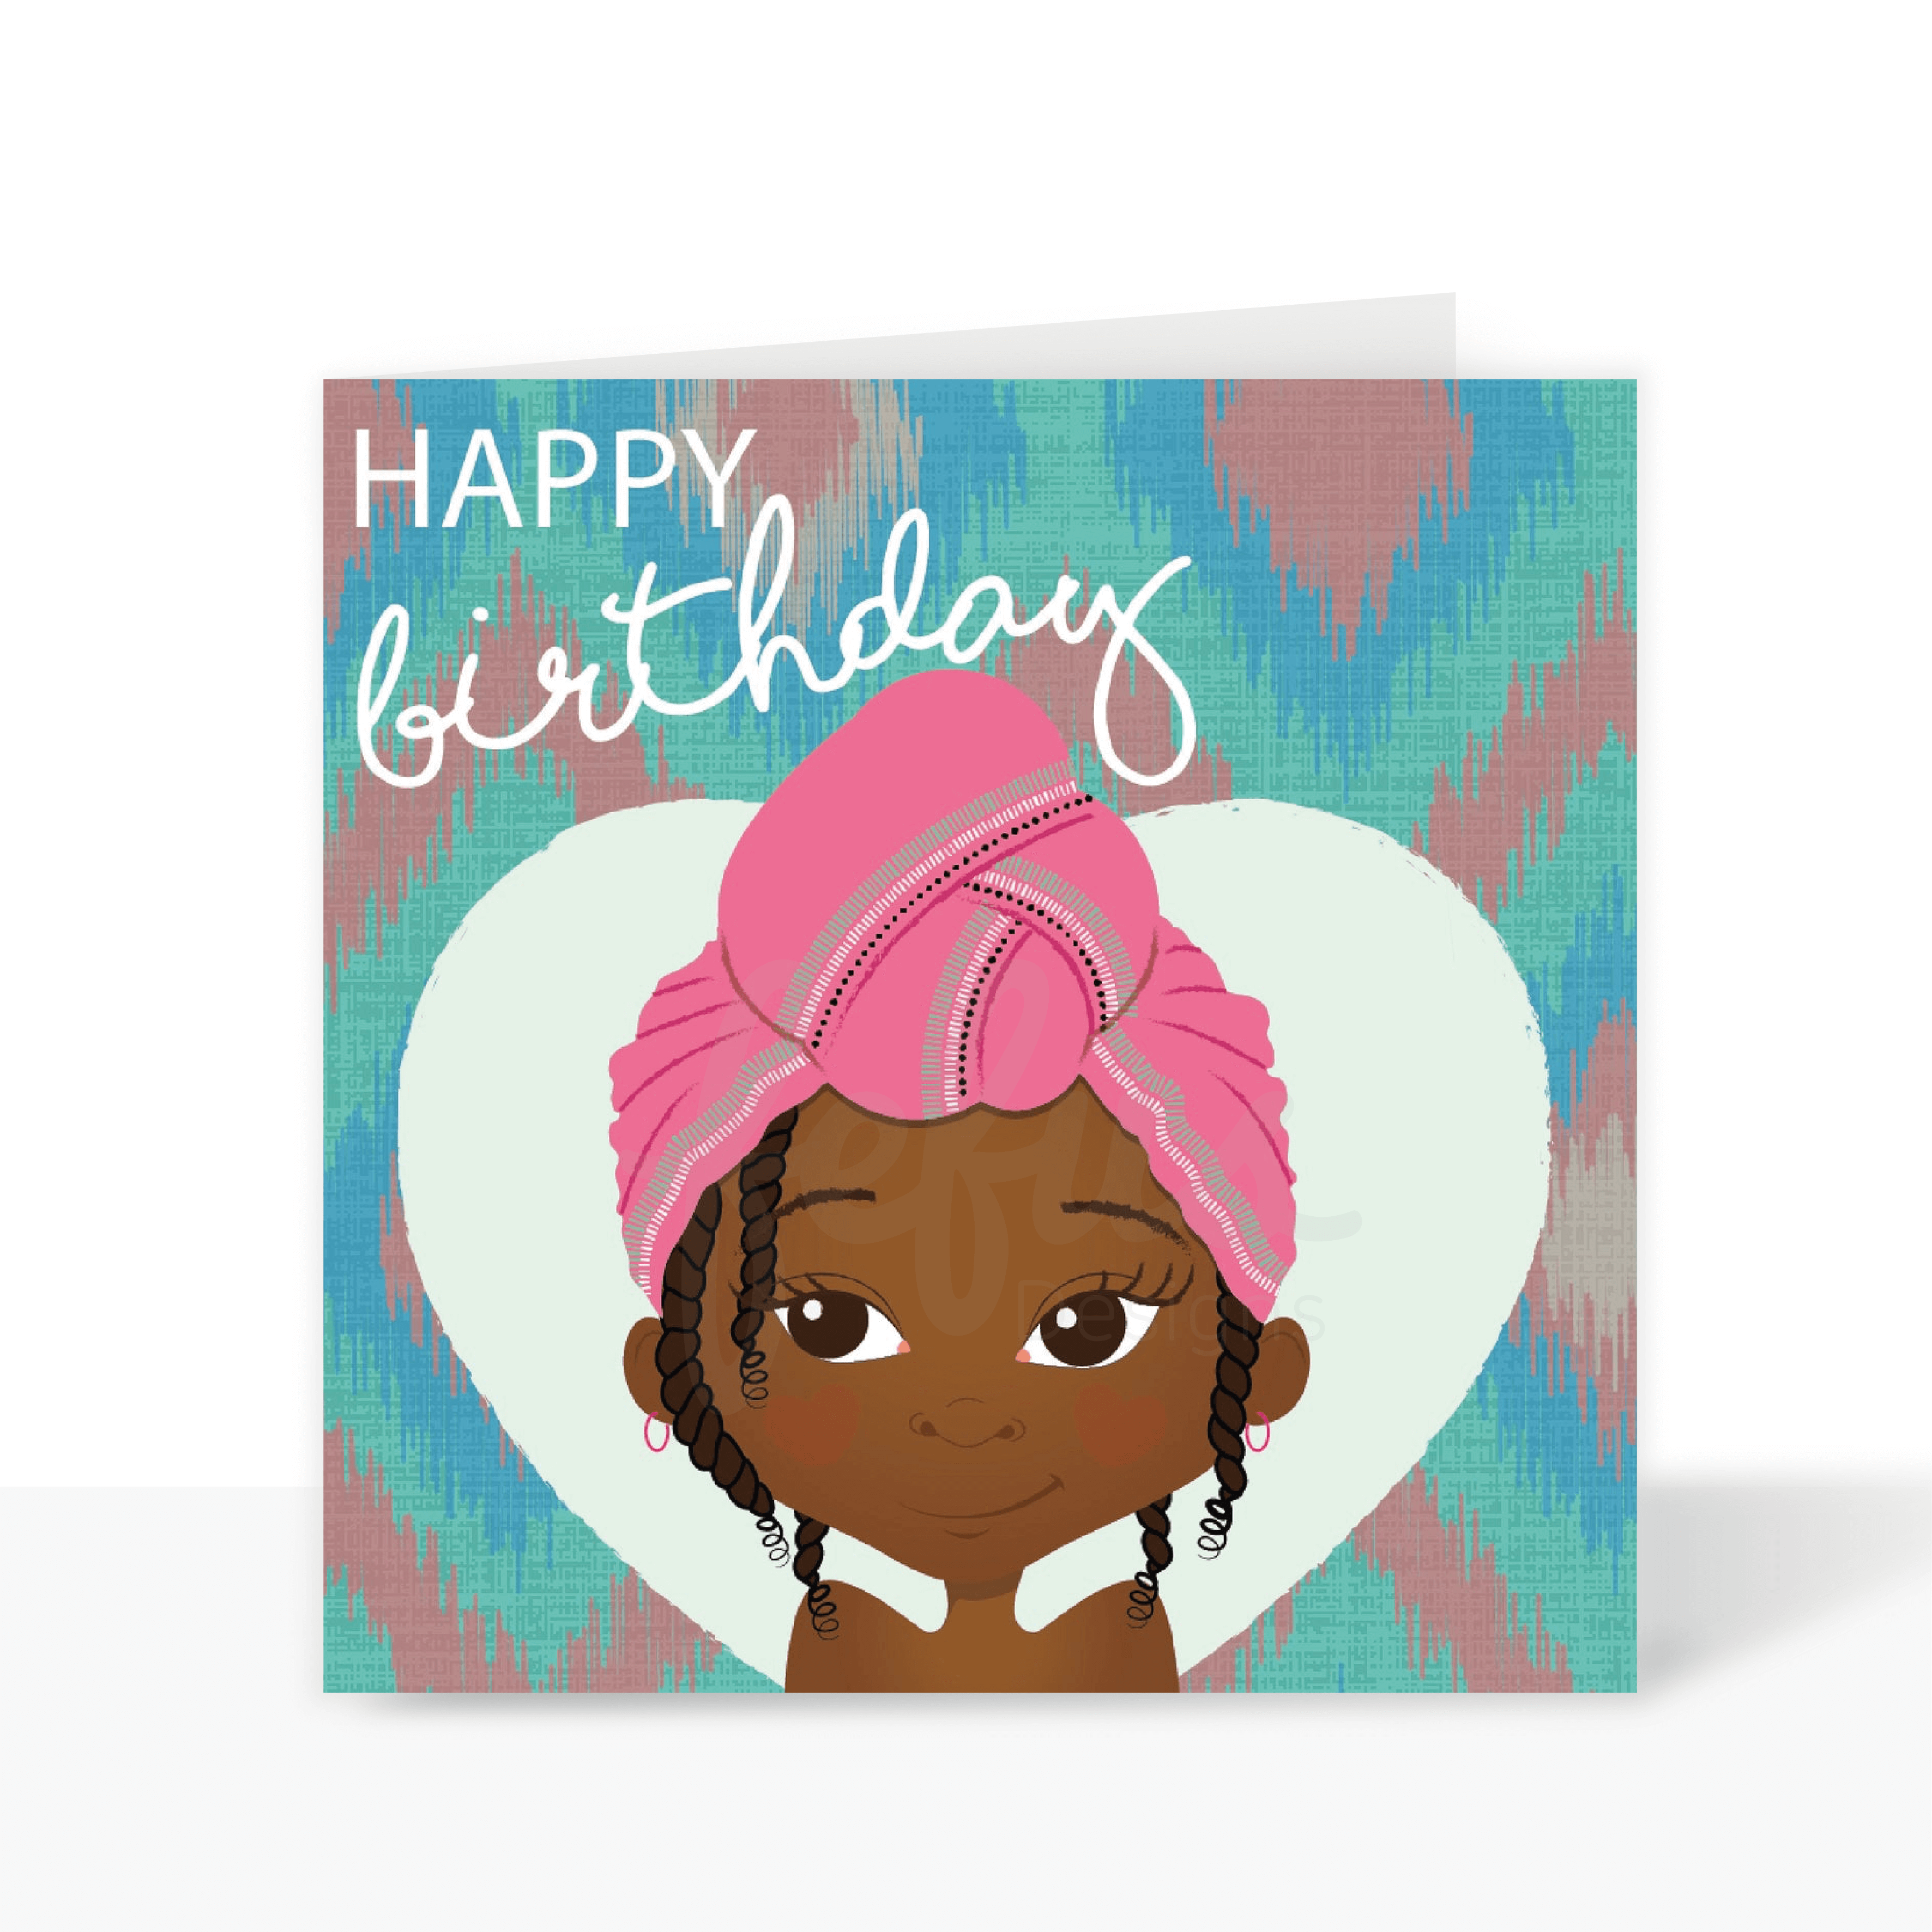 A birthday card featuring a Black girl with curly hair styled in twists, wearing a pink headwrap. 